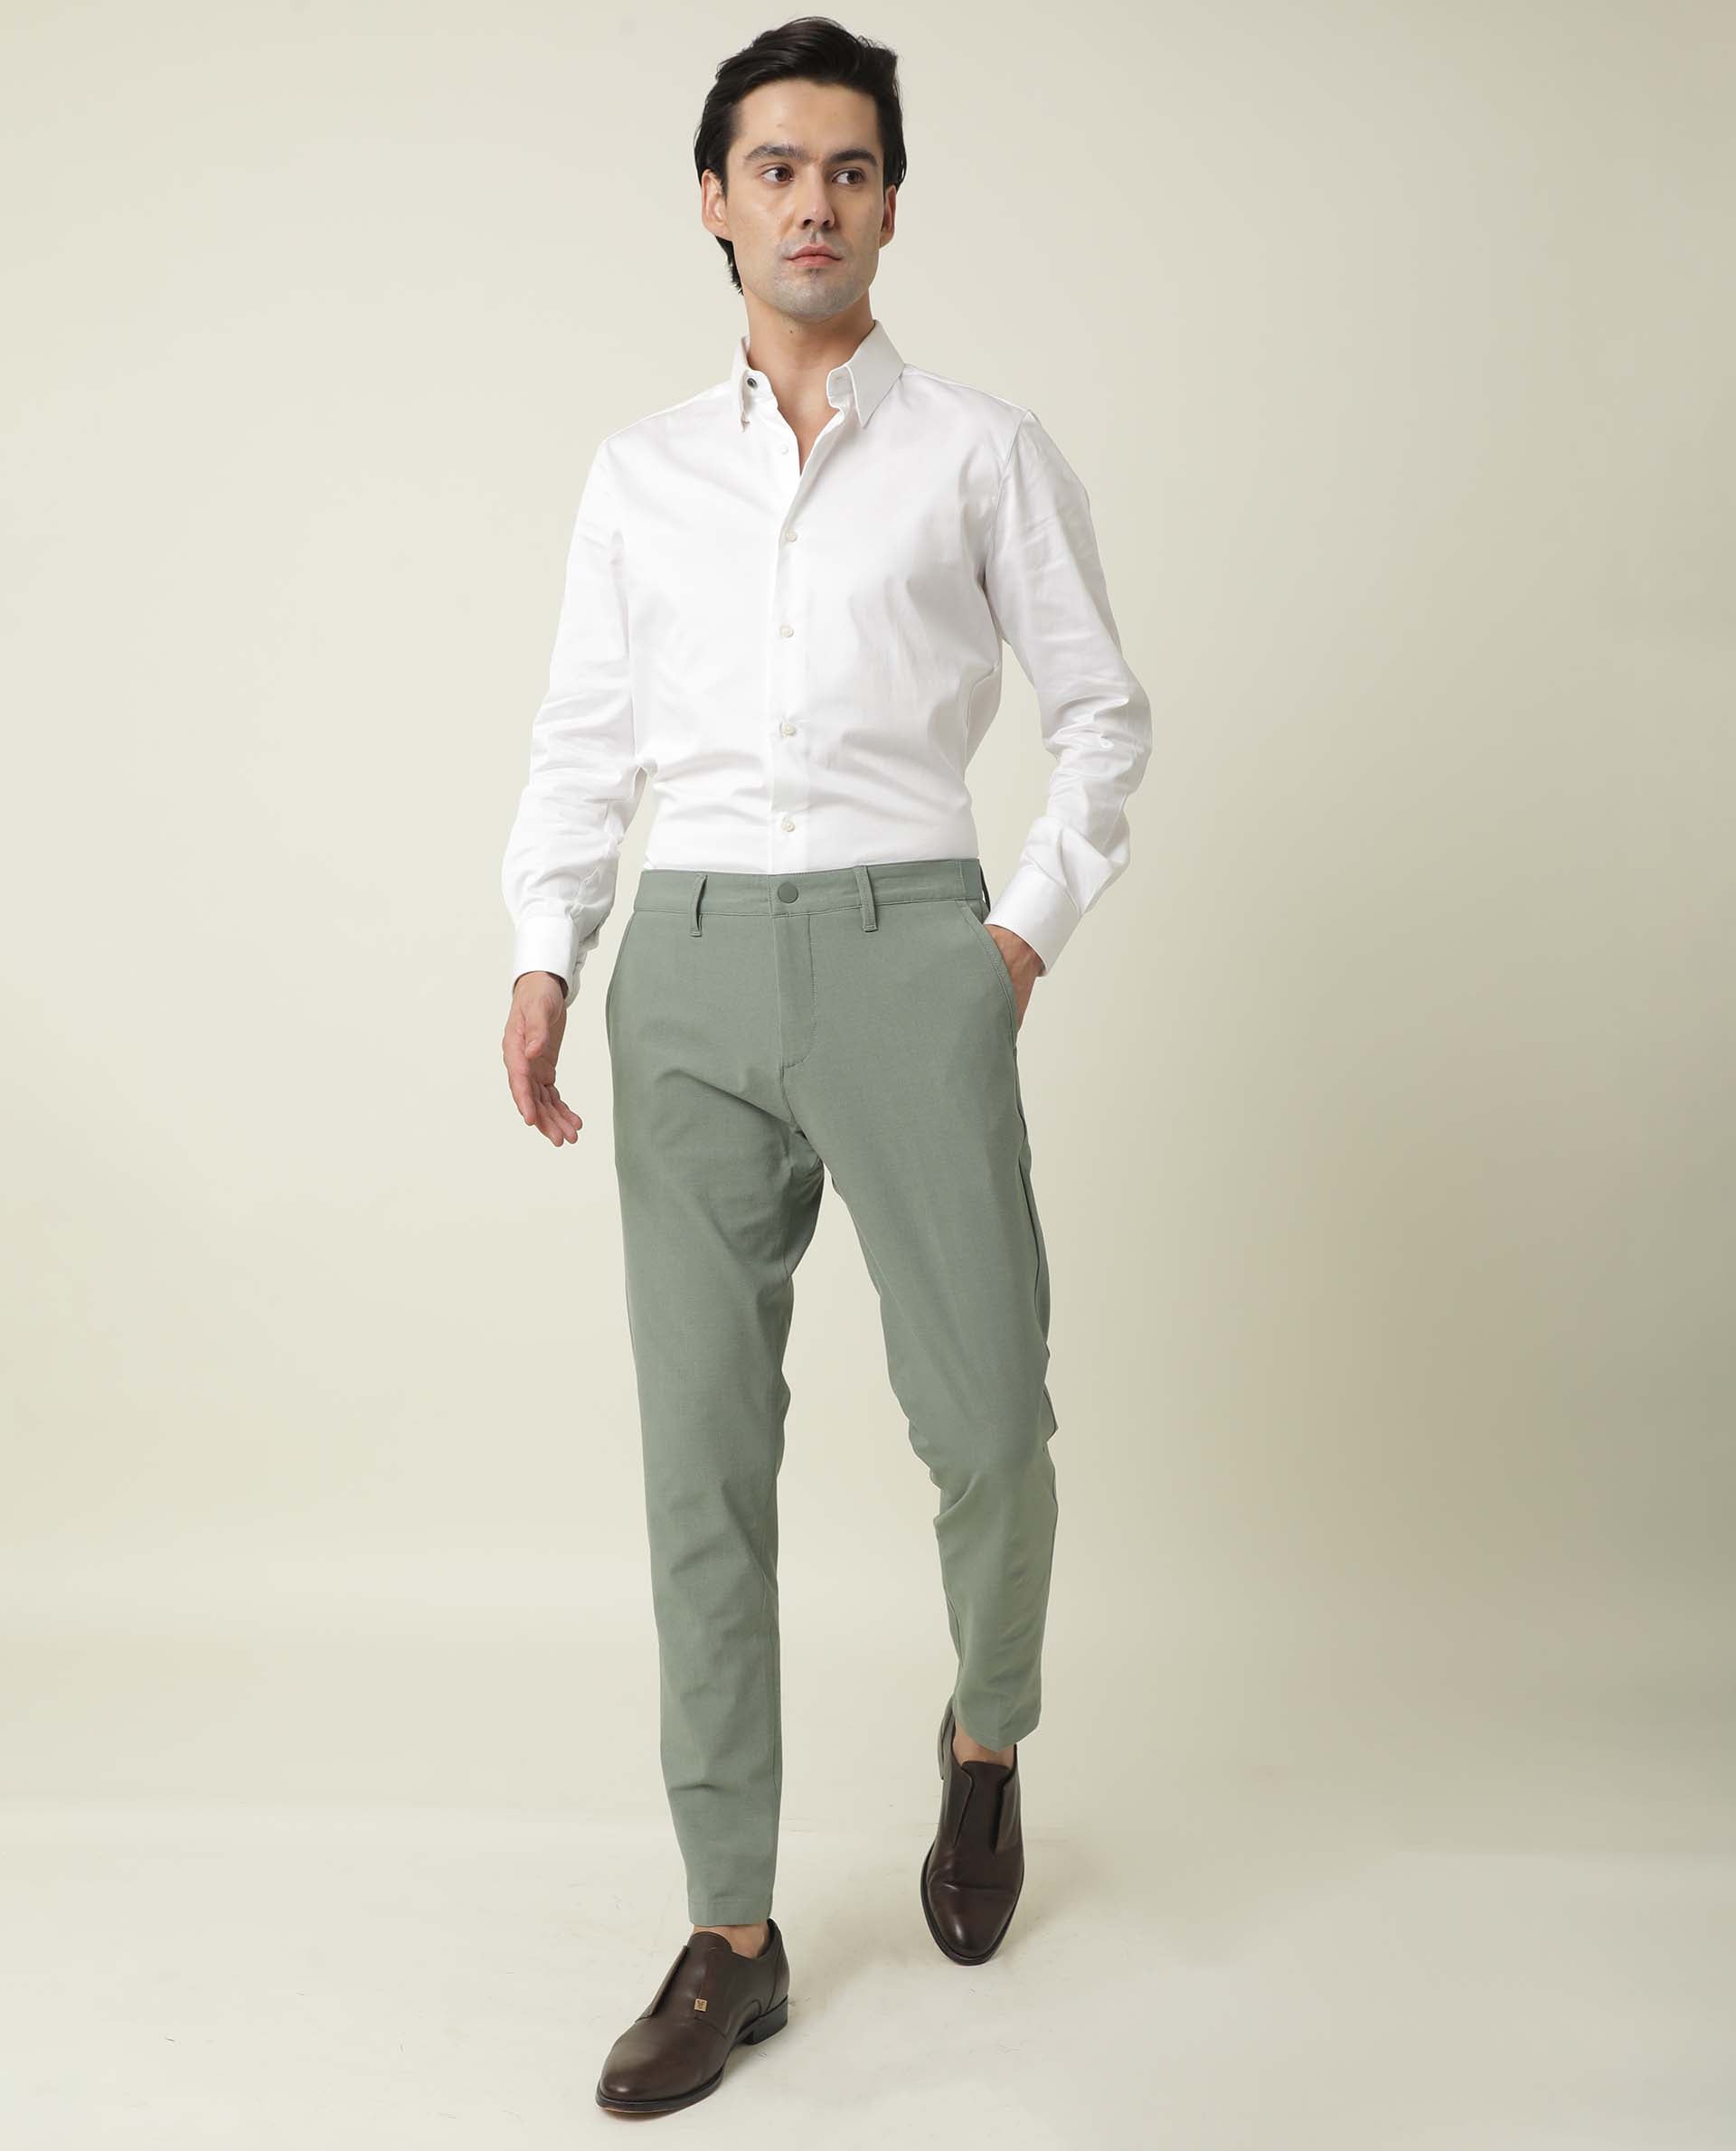 Buy Old Grey Men's Lime Green Slim Fit Trousers at Redfynd